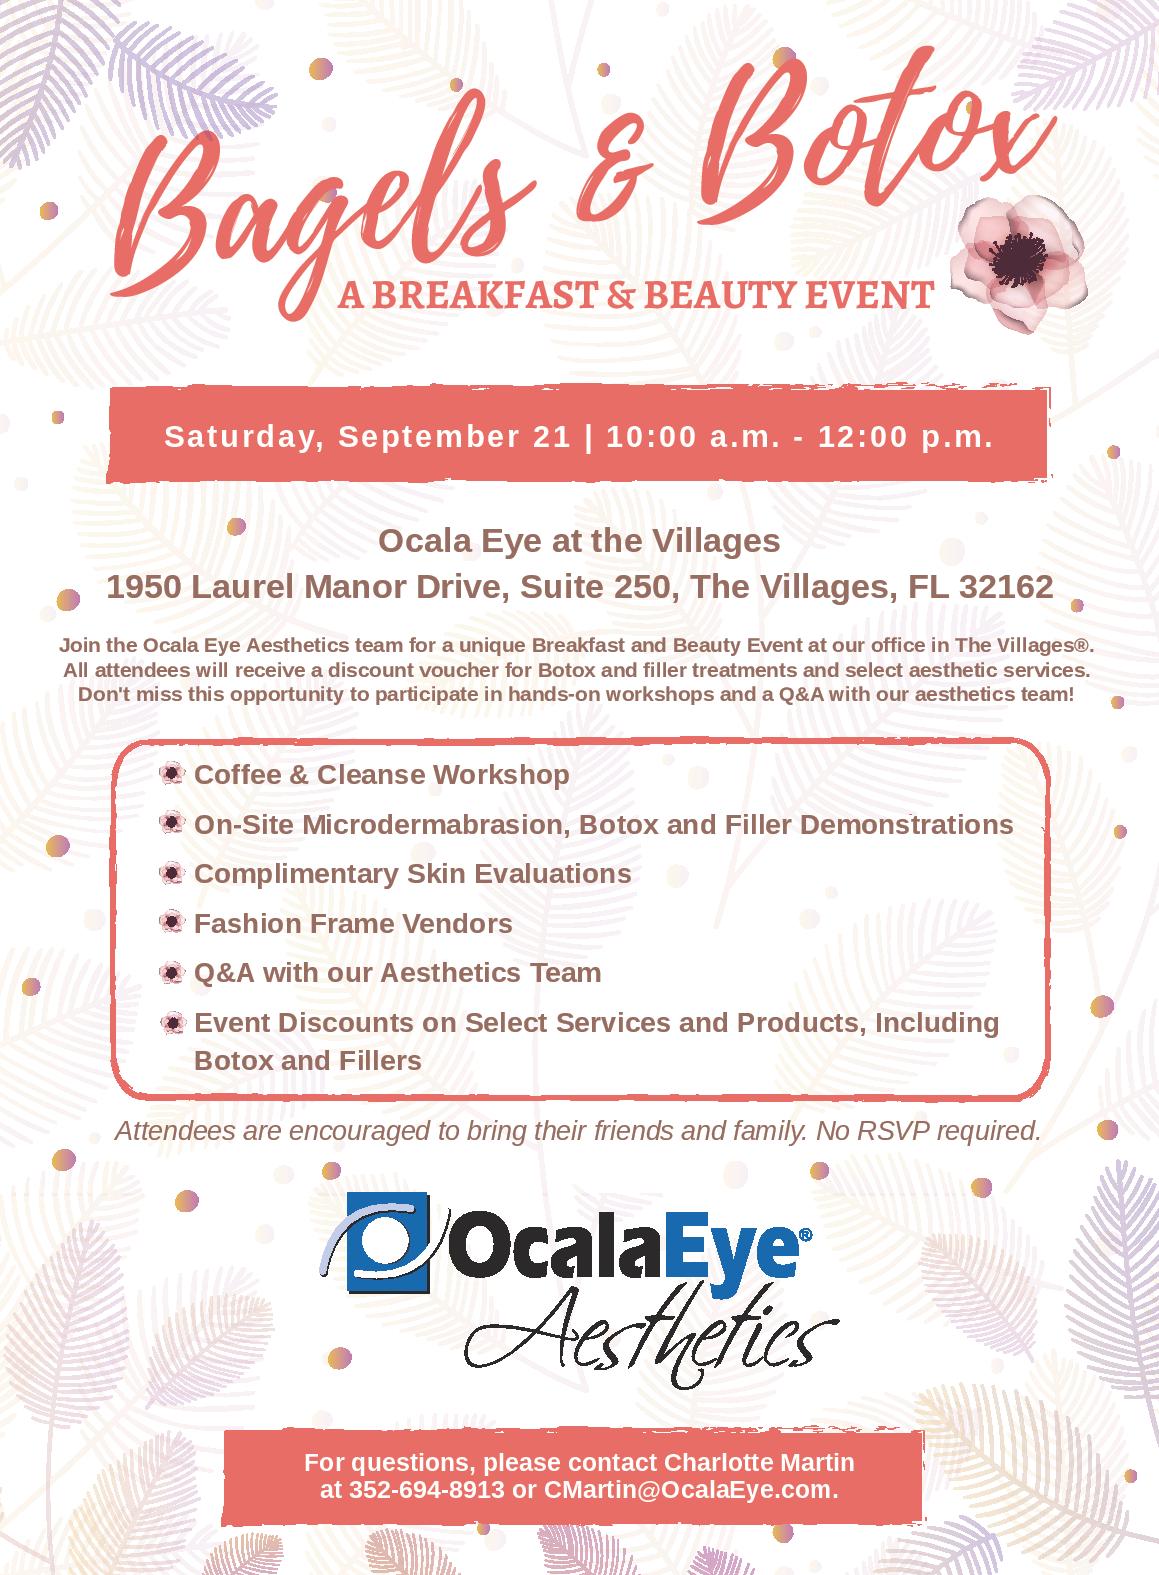 Bagels & Botox Beauty Event_FLYER-page-001